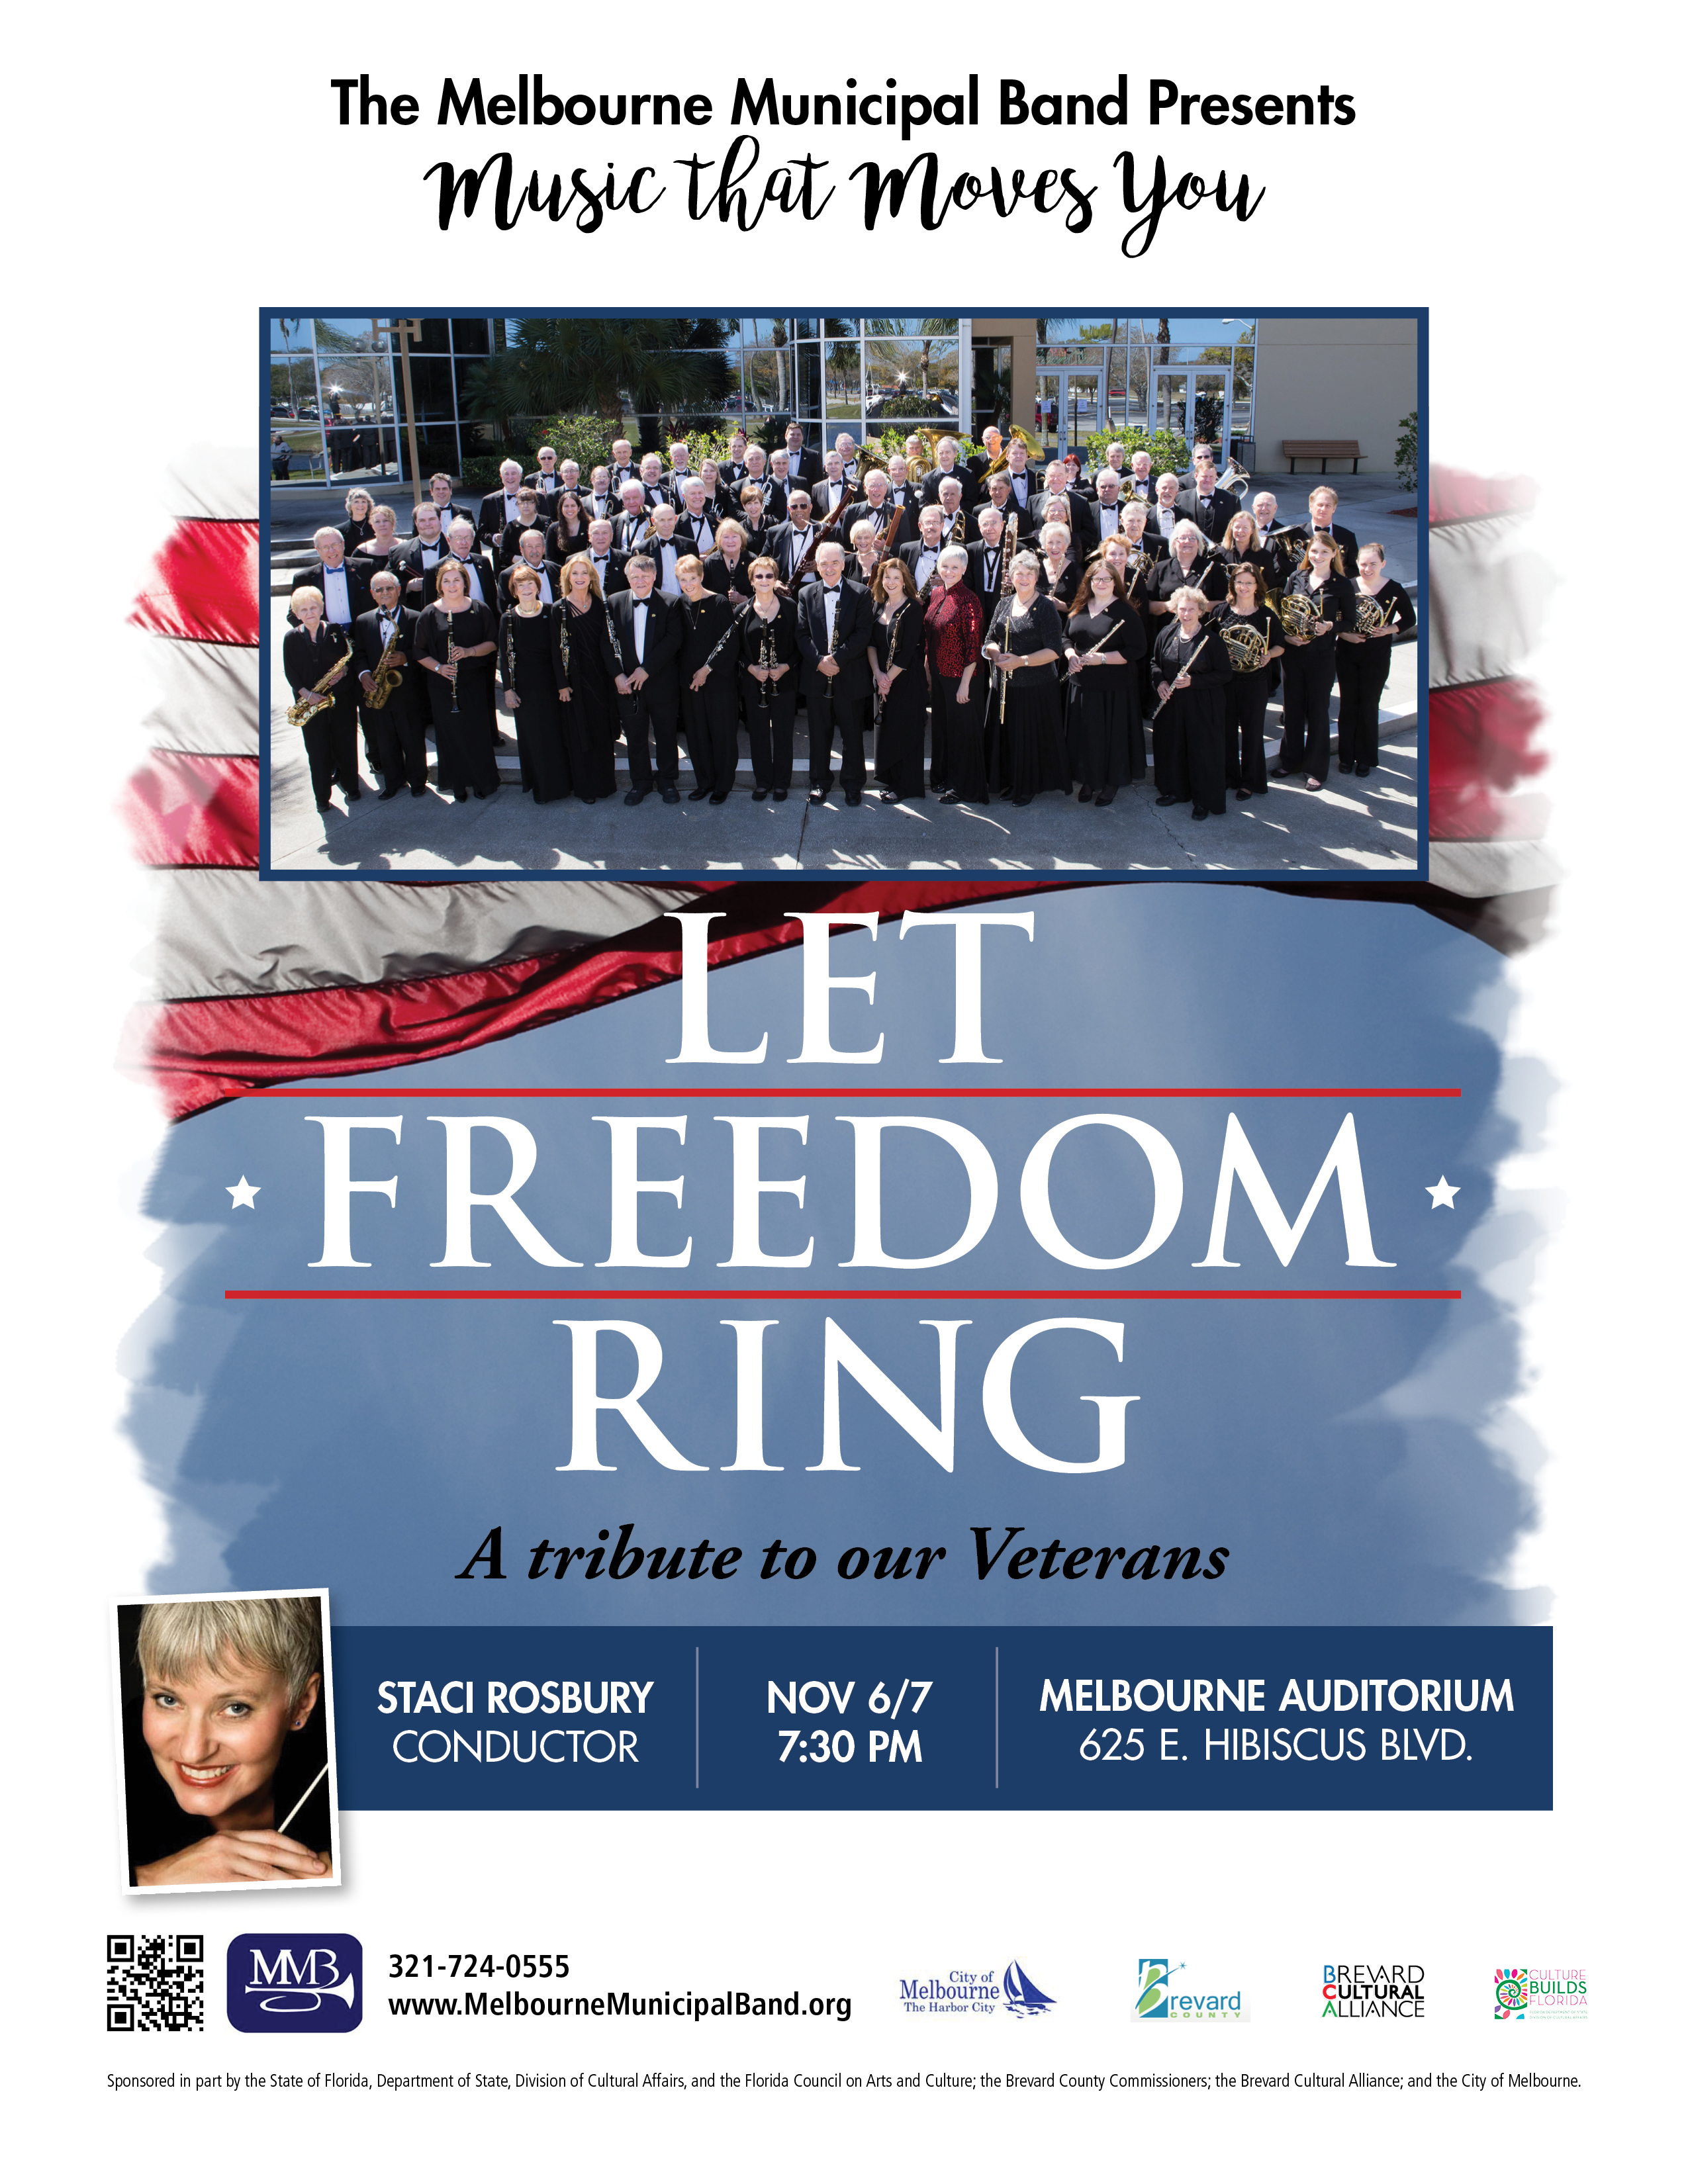 Let Freedom Ring presented by the Melbourne Municipal Band